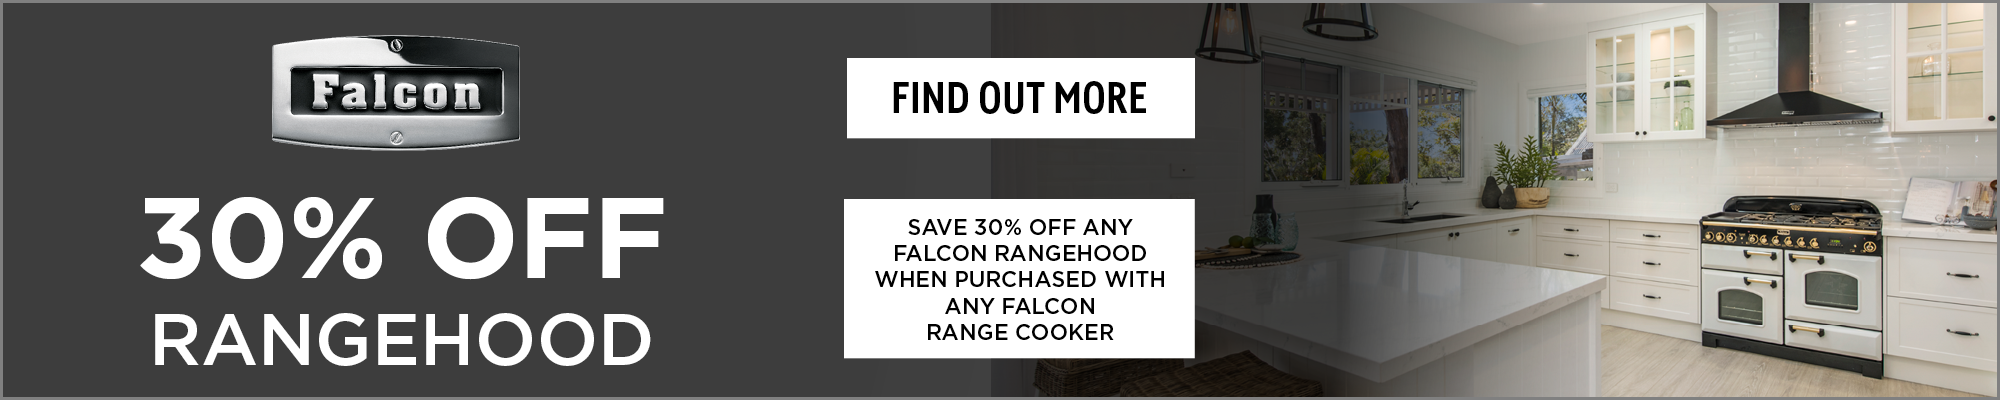 Save 30%* Off Any Falcon Rangehood When Purchased With Any Falcon Range Cooker